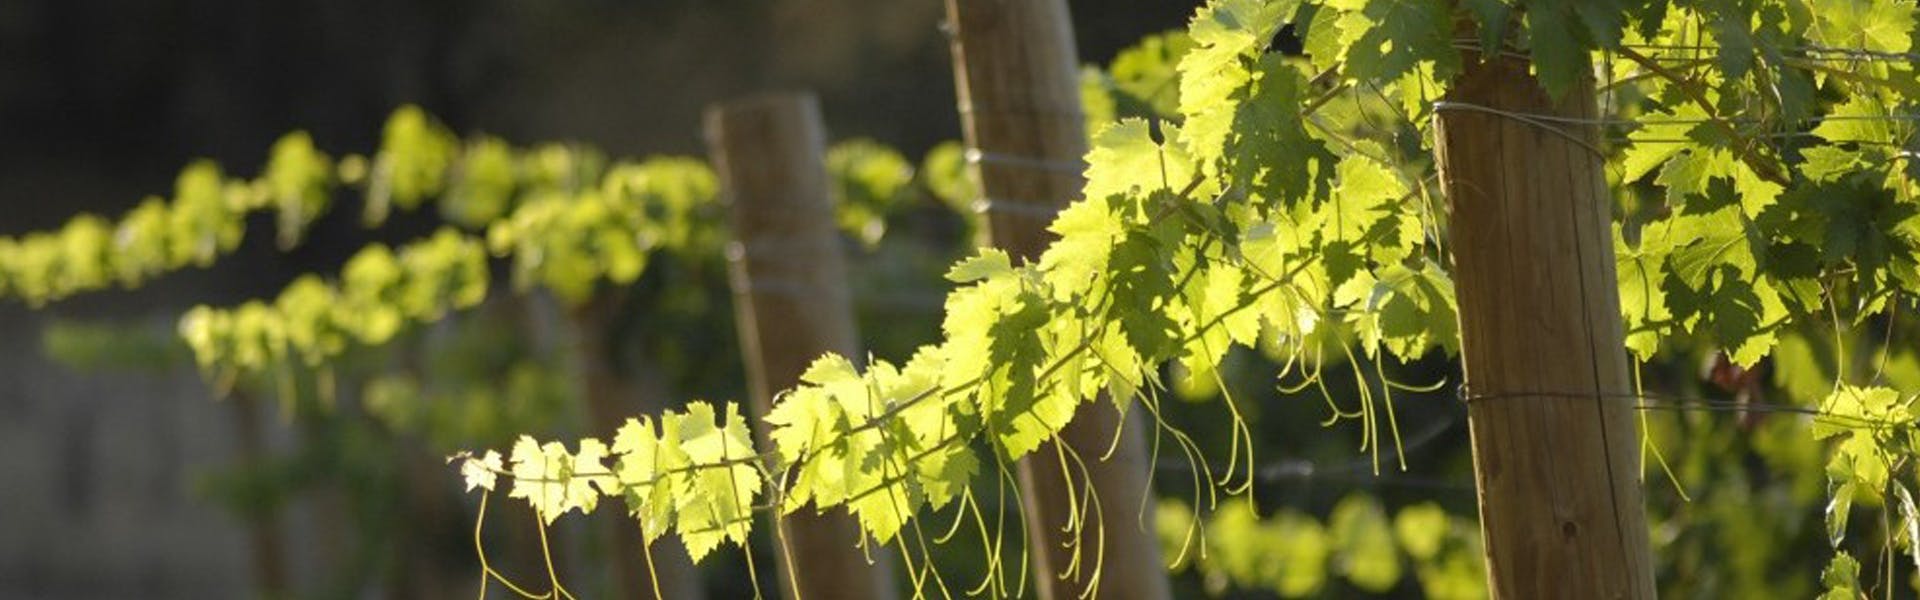 A row of wine grape vines in a vineyard